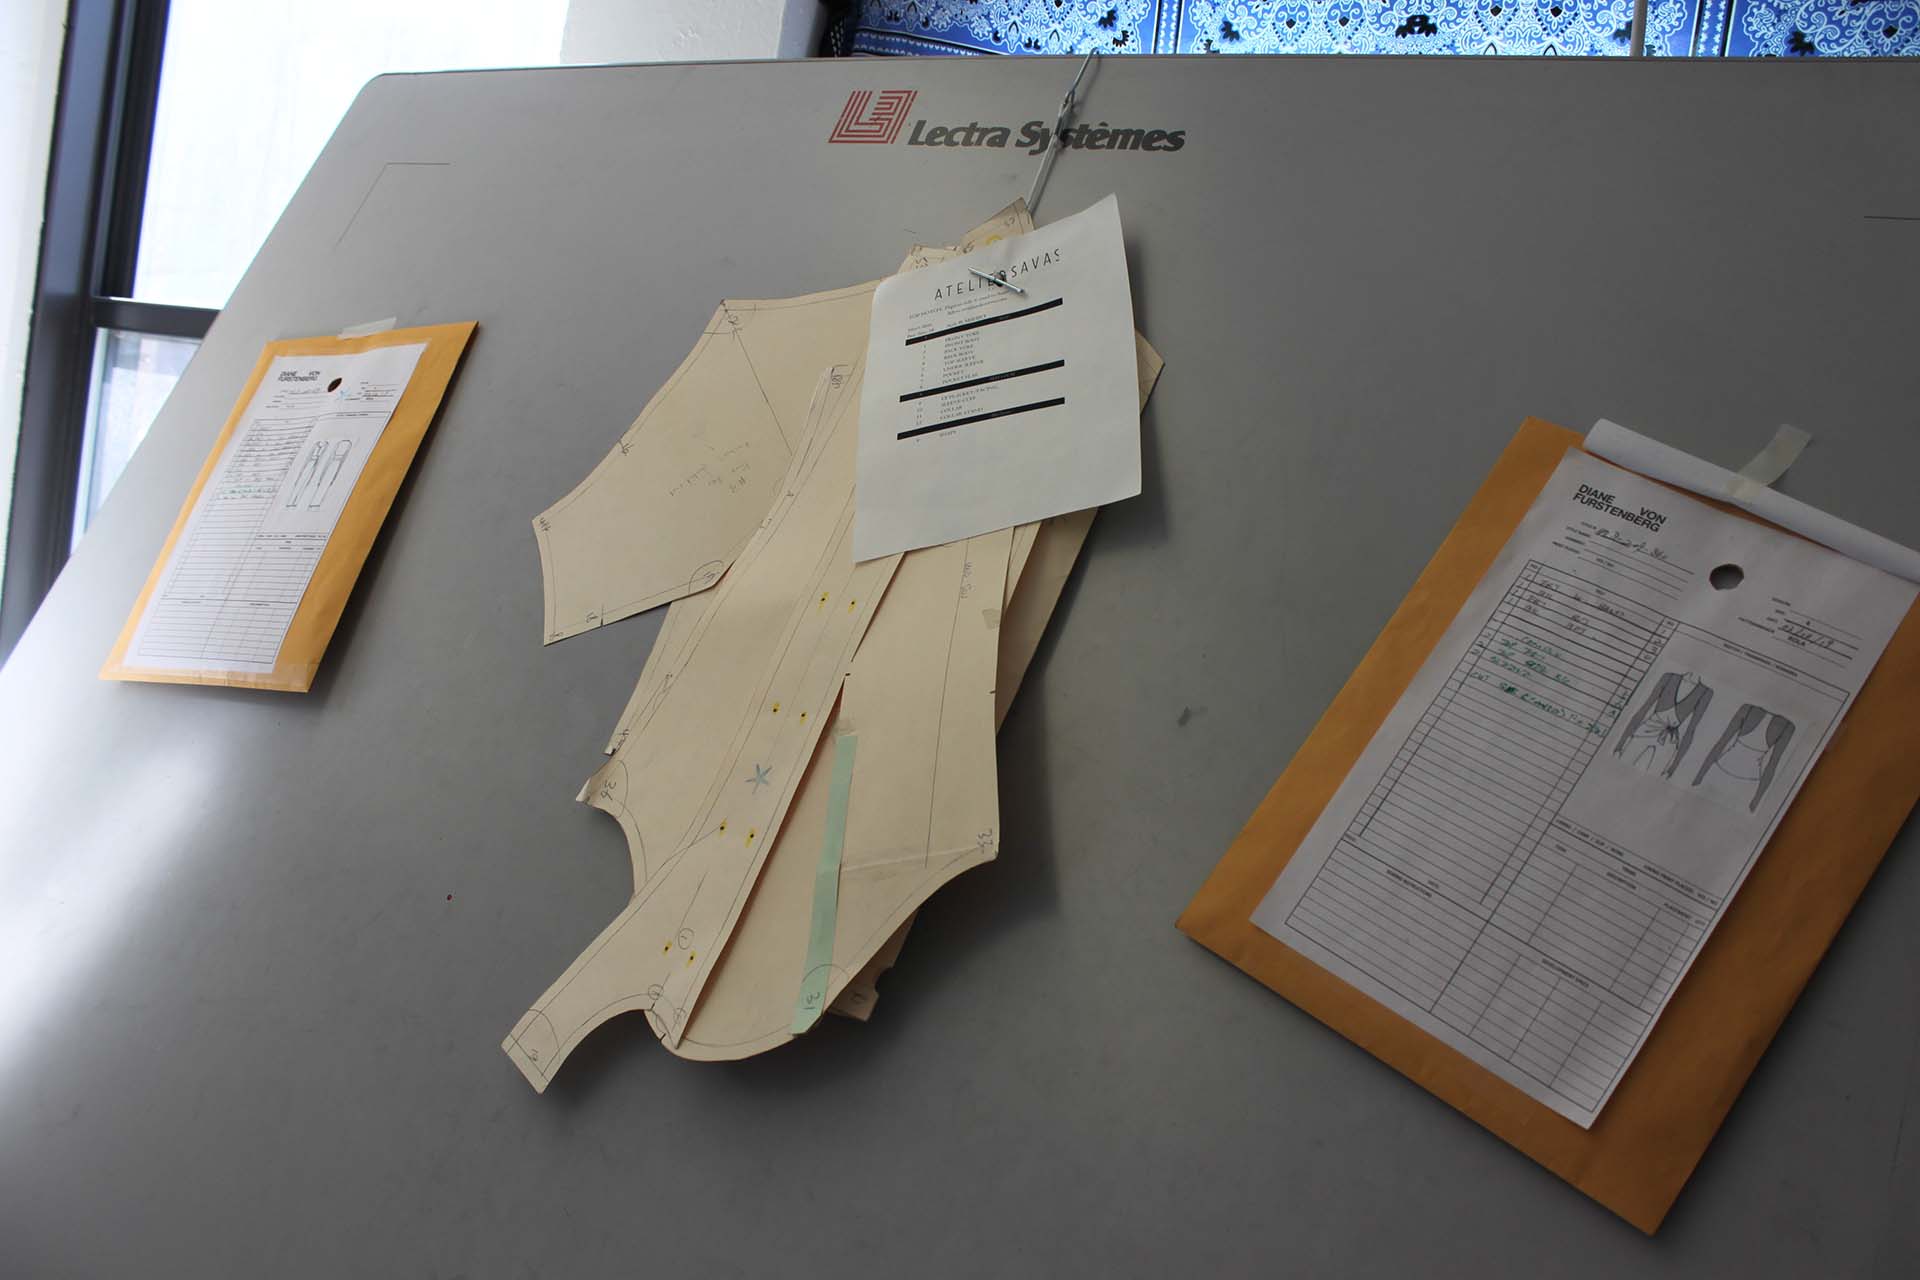 Paper patterns and specification sheets hanging from Lectra systems digitizer table.